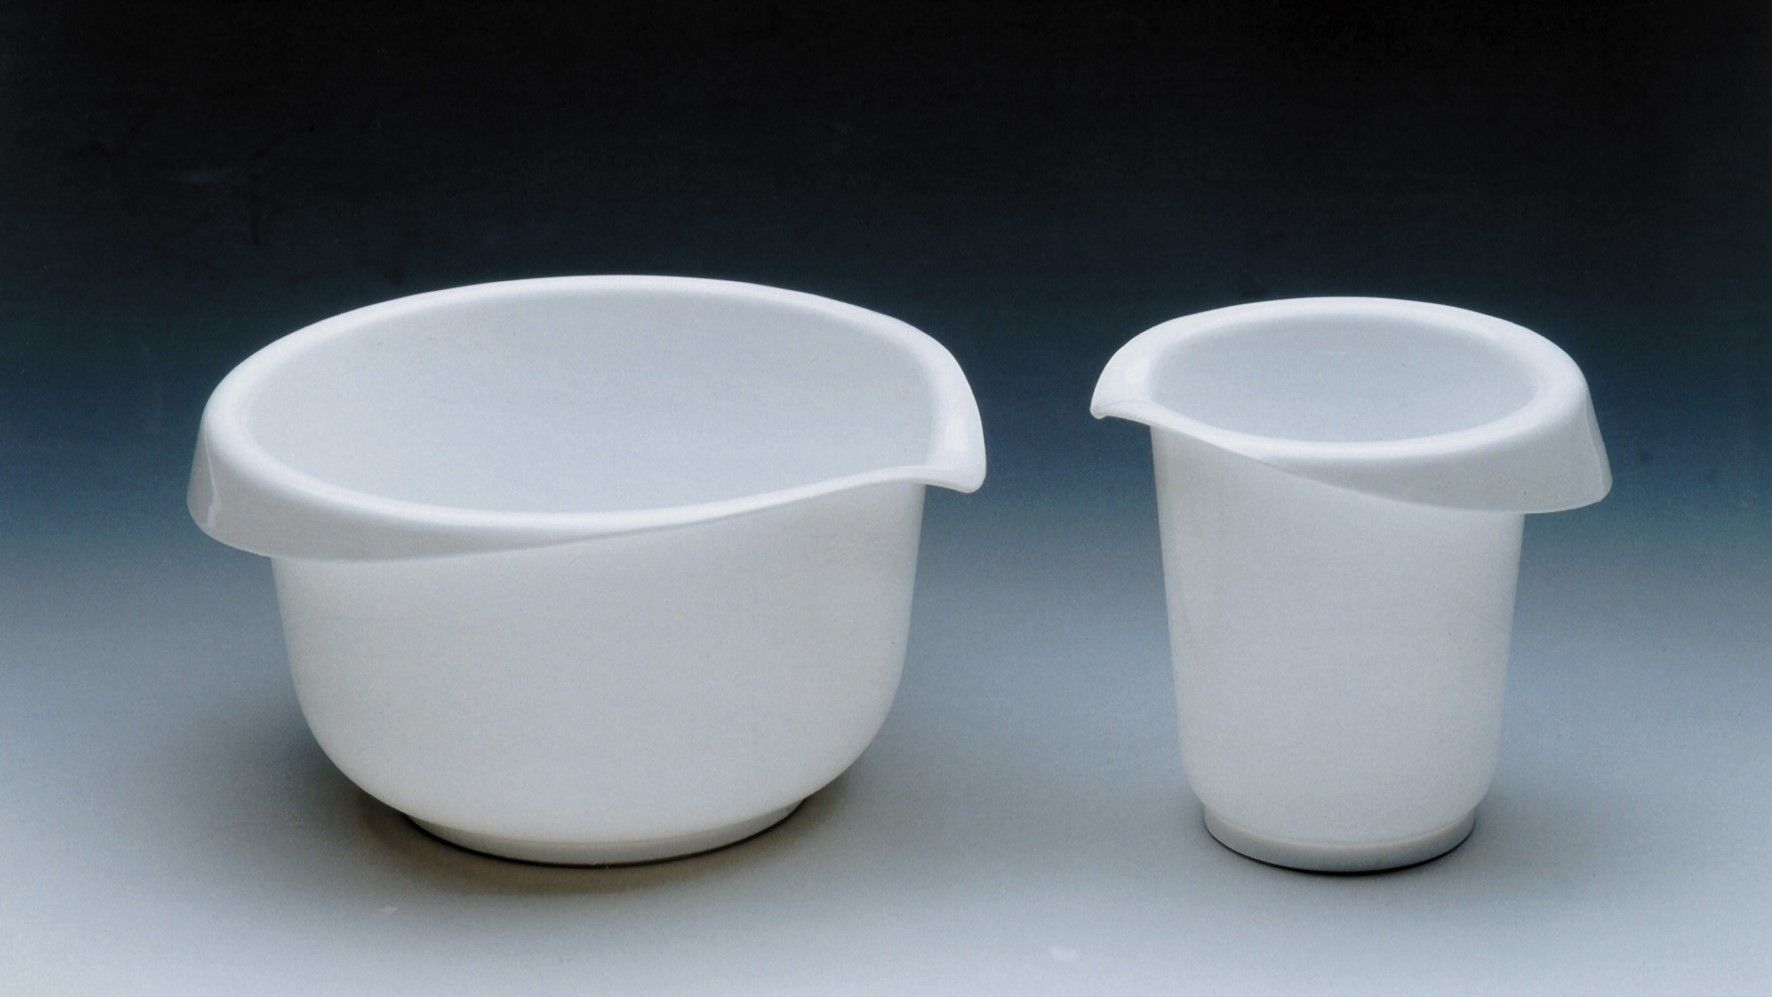 Two mixing bowls, large and small